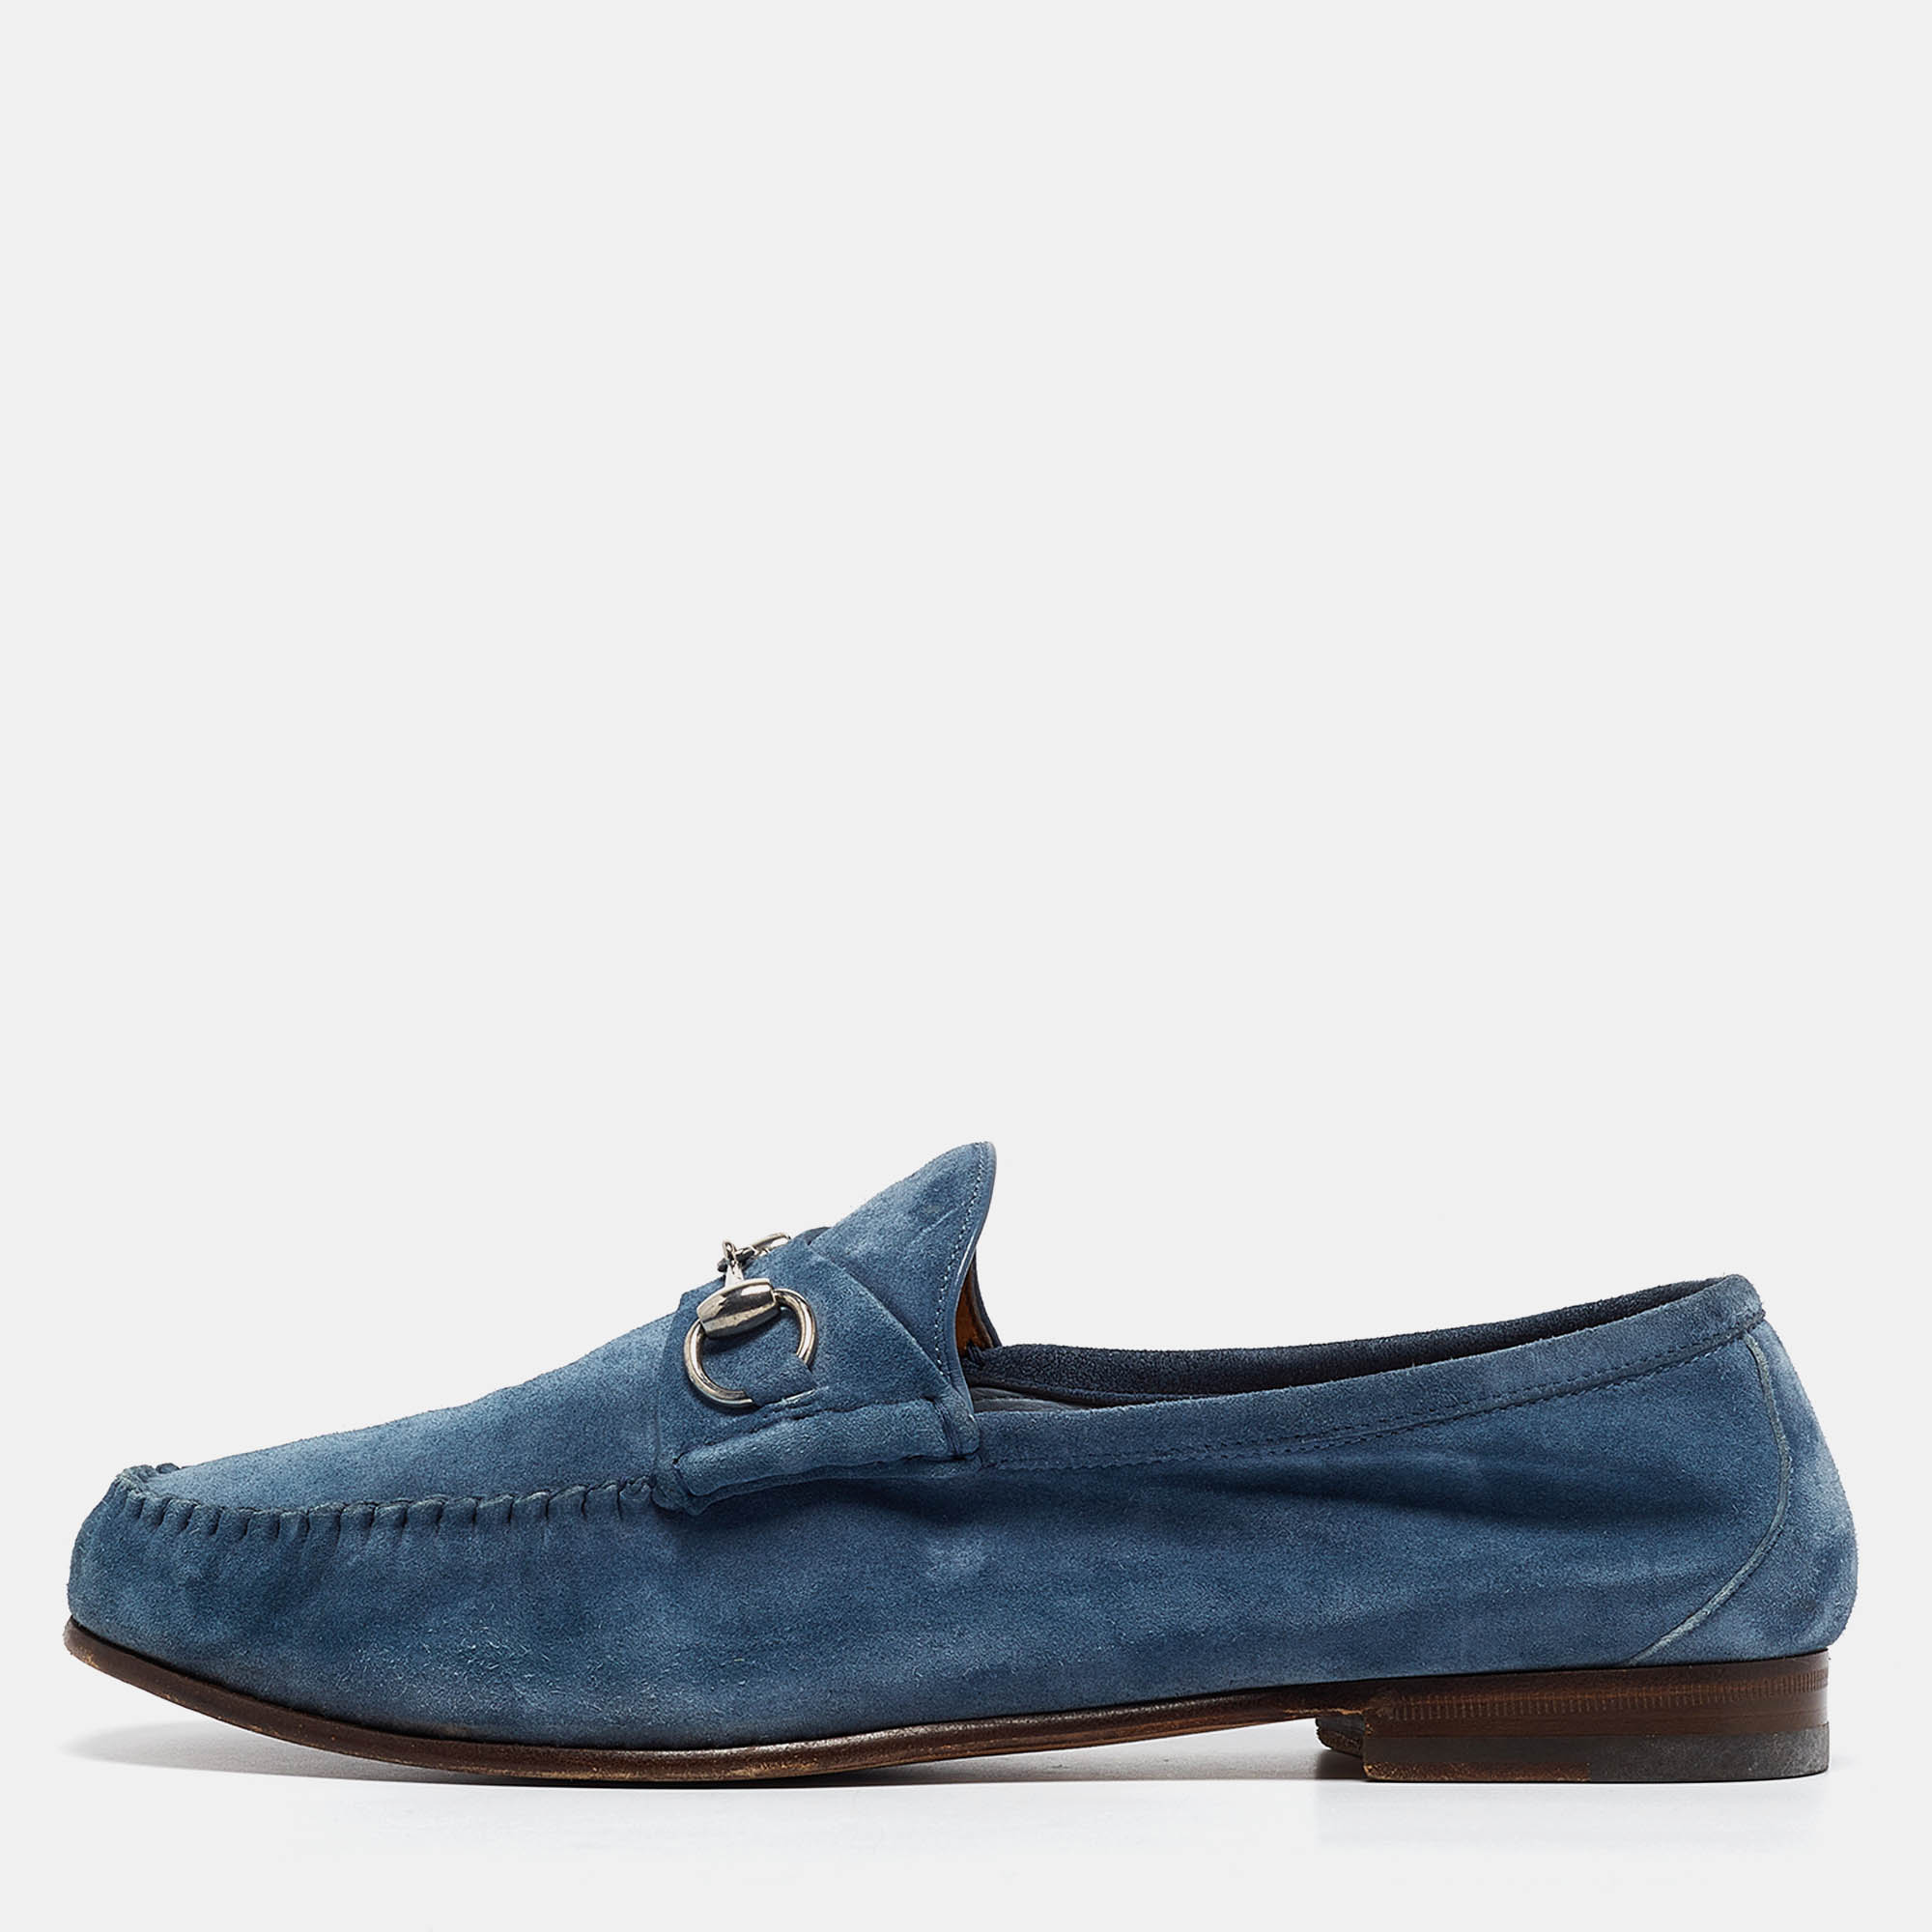 

Gucci Blue Suede Horsebit Slip On Loafers Size 44.5